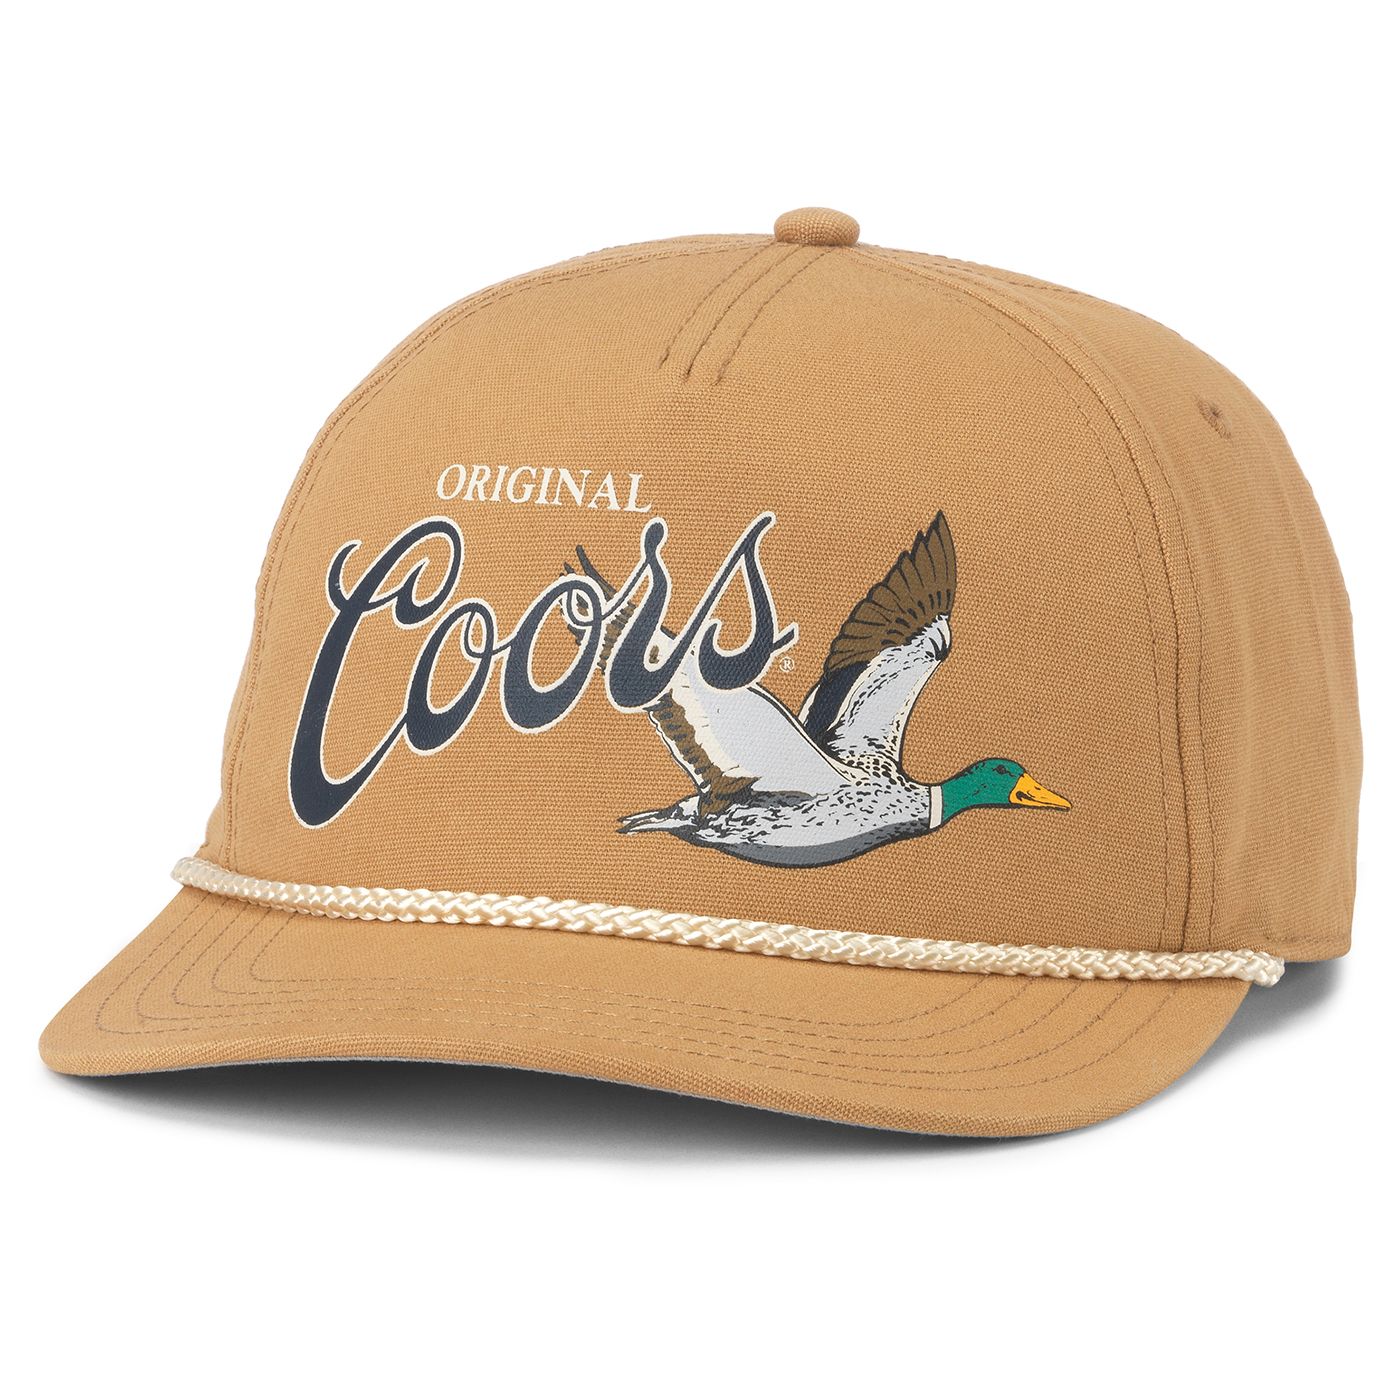 CANVAS CAPPY - COORS DUCK